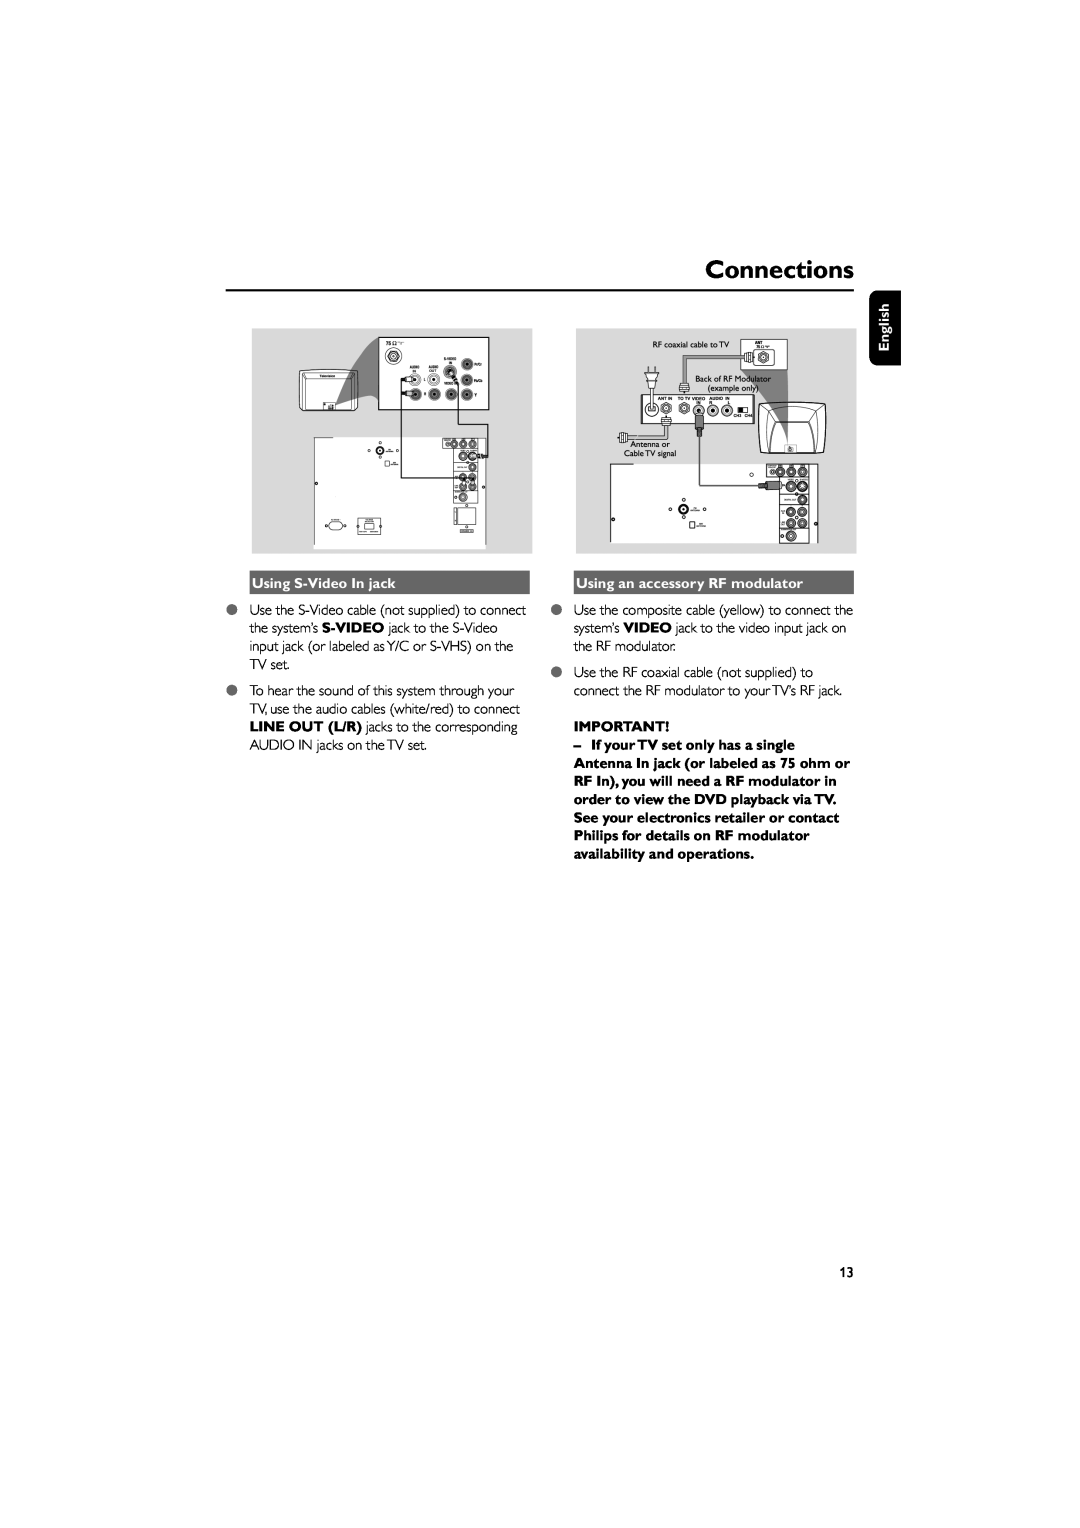 Philips FWD182 user manual Connections, English, Using S-VideoIn jack, Using an accessory RF modulator 